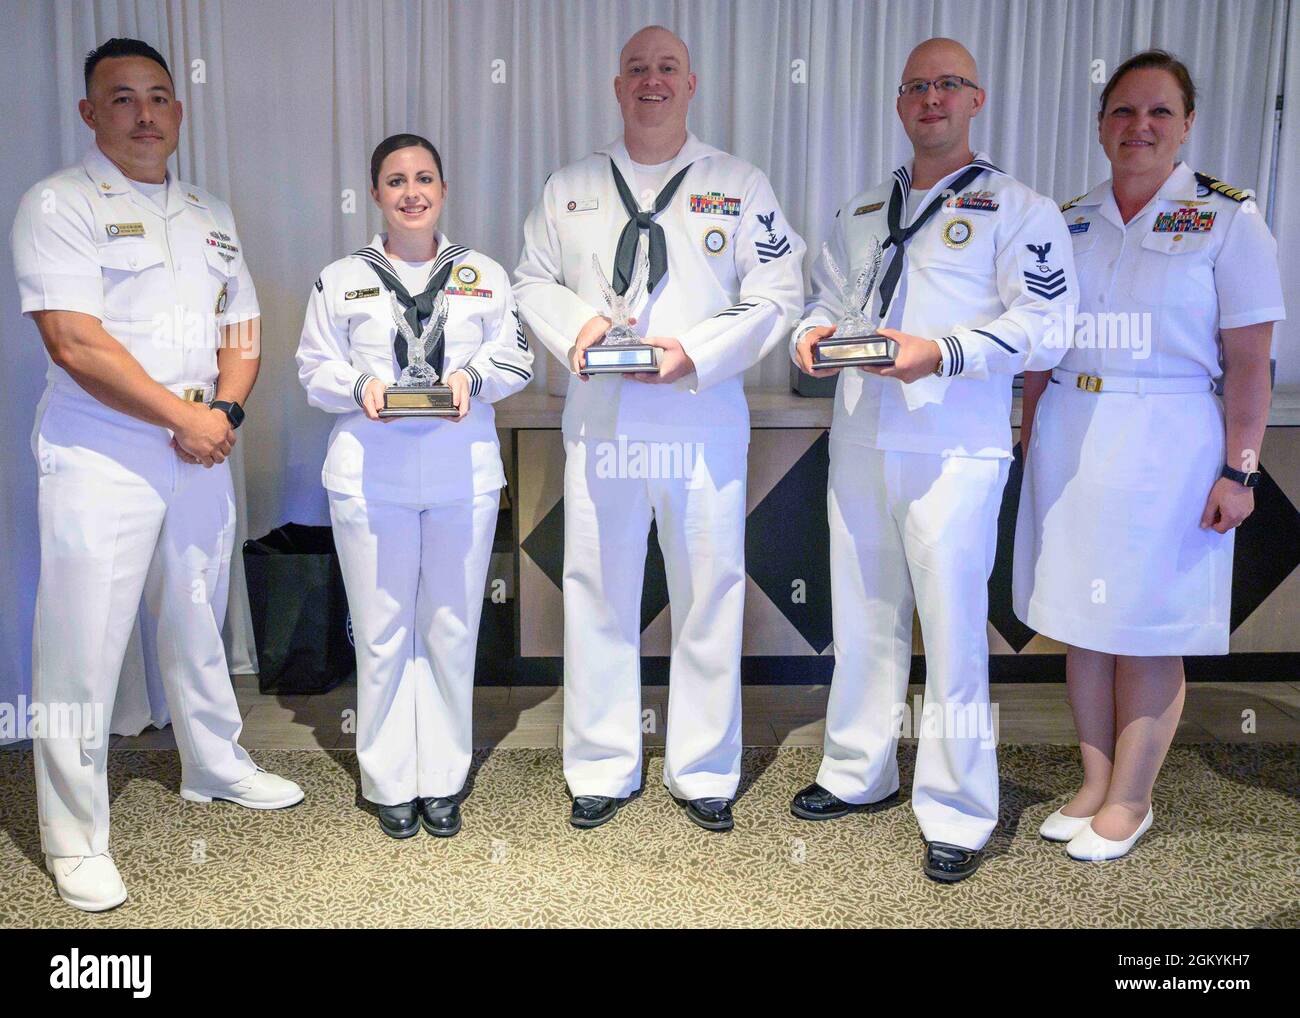 210729-N-FC991-1179  WASHINGTON (July 29, 2021) 2020 Recruiter of the Year winners pose with Master Chief Navy Counselor Kevin Kikawa (far left), the chief recruiter assigned to Navy Recruiting Region West, and Capt. Katrina Hill (far right), commodore of Navy Recruiting Region East. Stock Photo